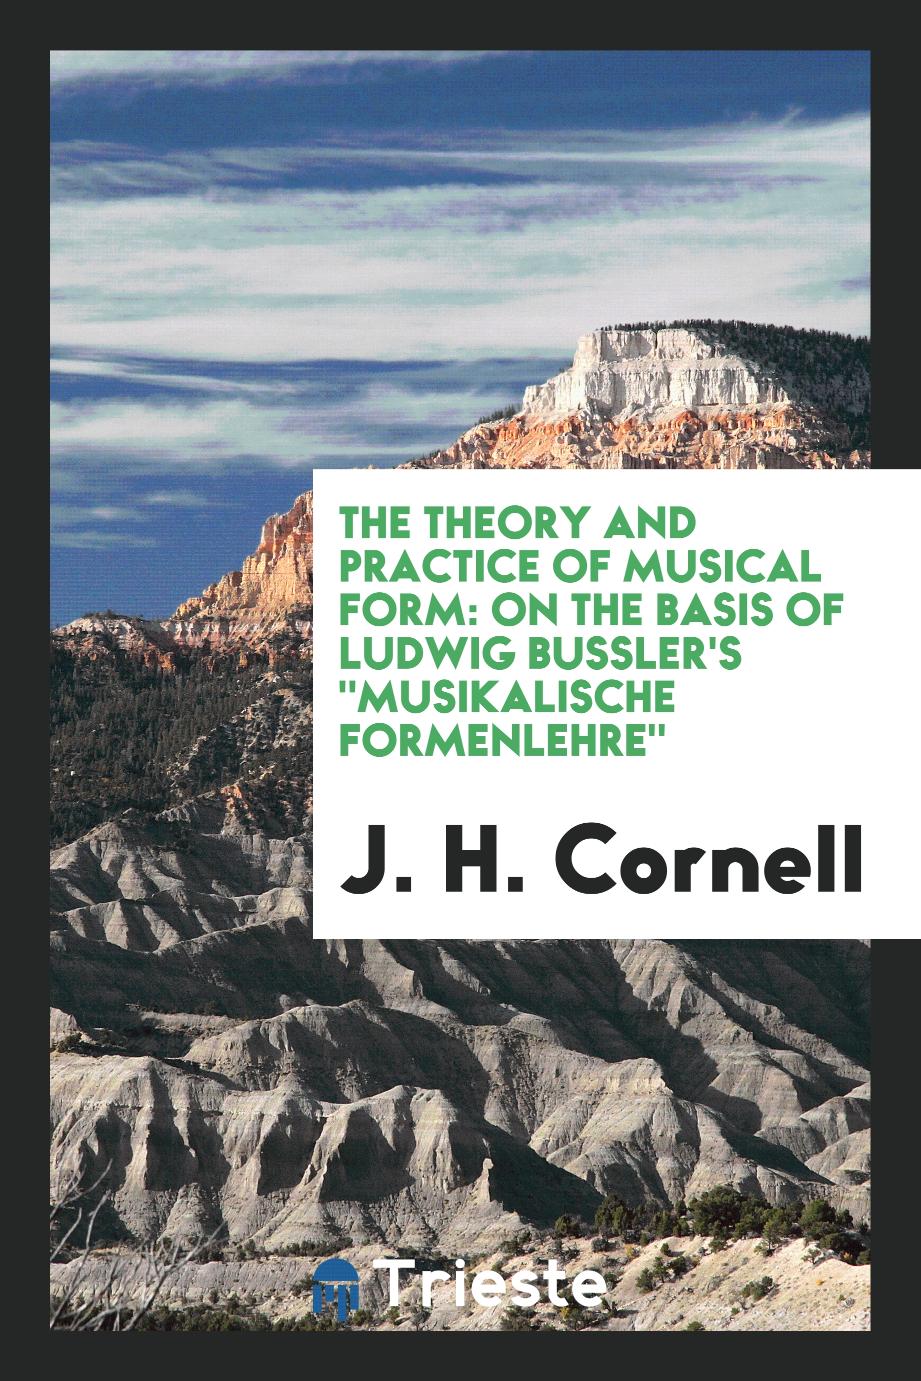 The Theory and Practice of Musical Form: On the Basis of Ludwig Bussler's "Musikalische Formenlehre"